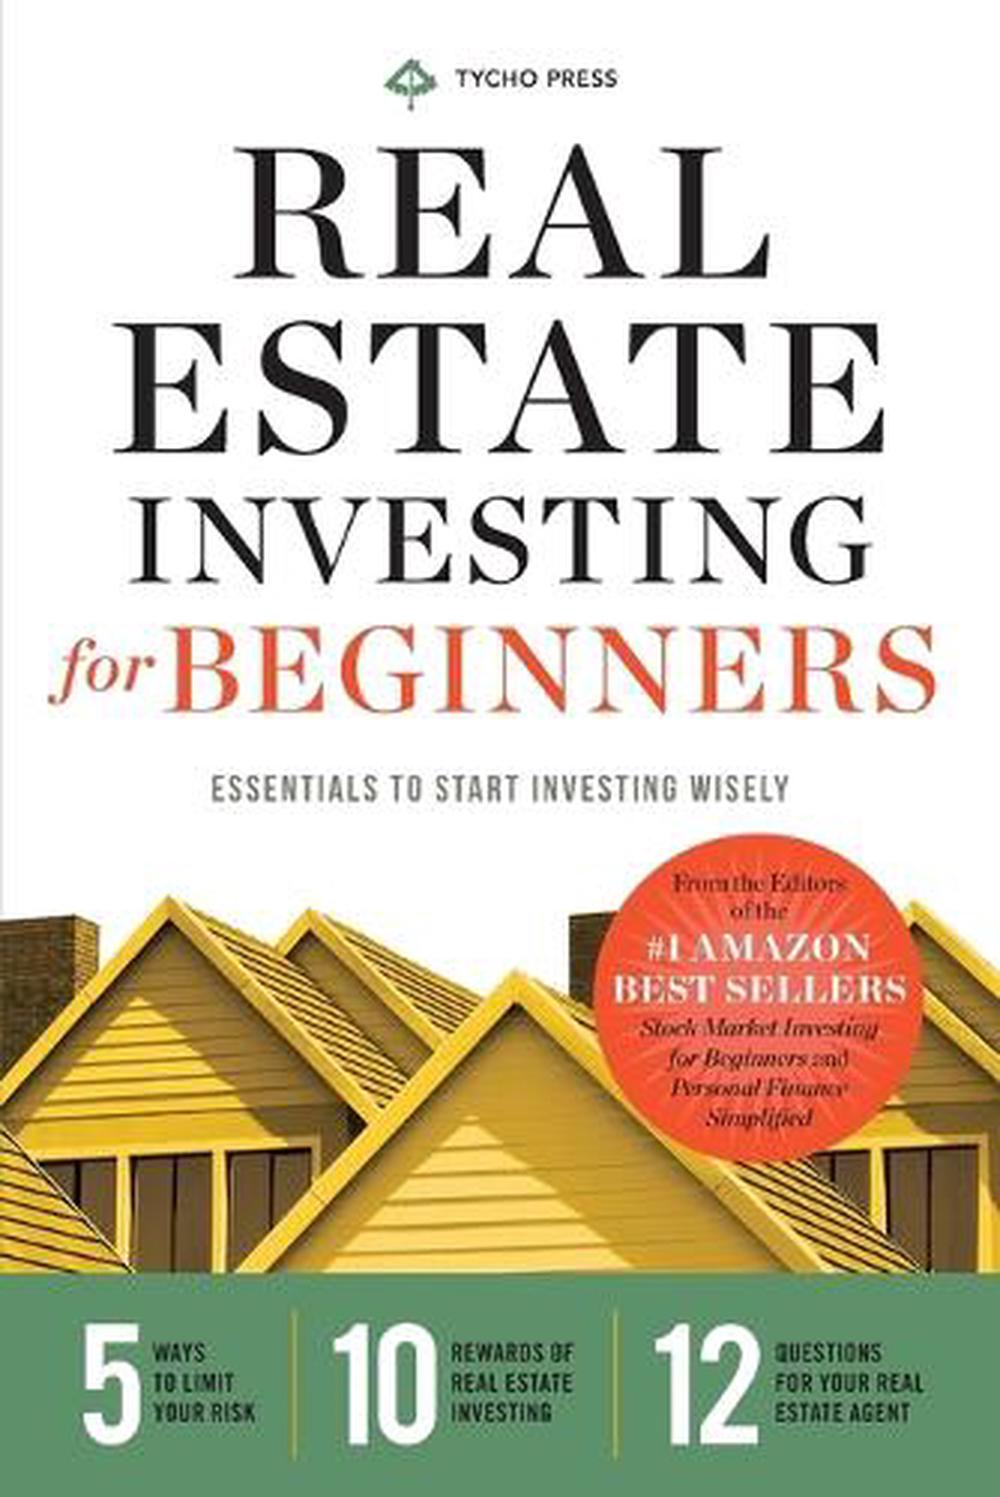 Real Estate Investing for Beginners Essentials to Start Investing